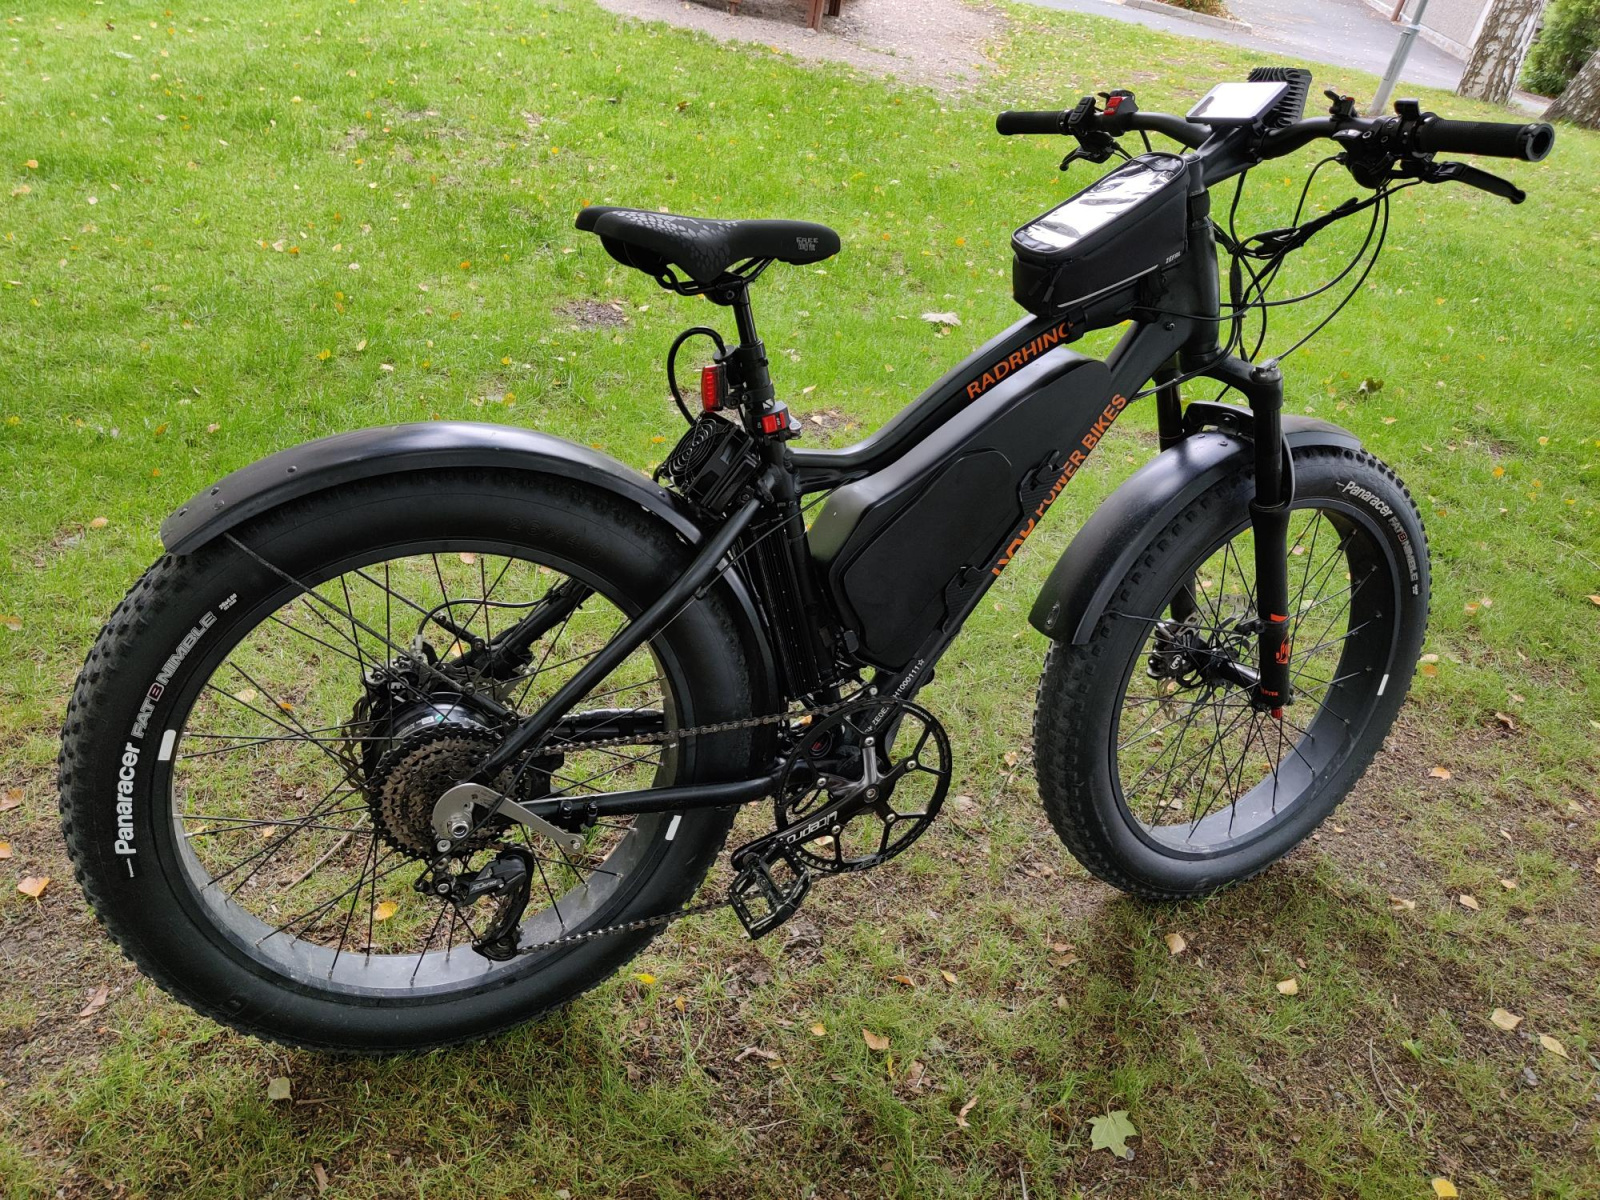 High power Fat bike with water cooled G062 motor (BAC2000)